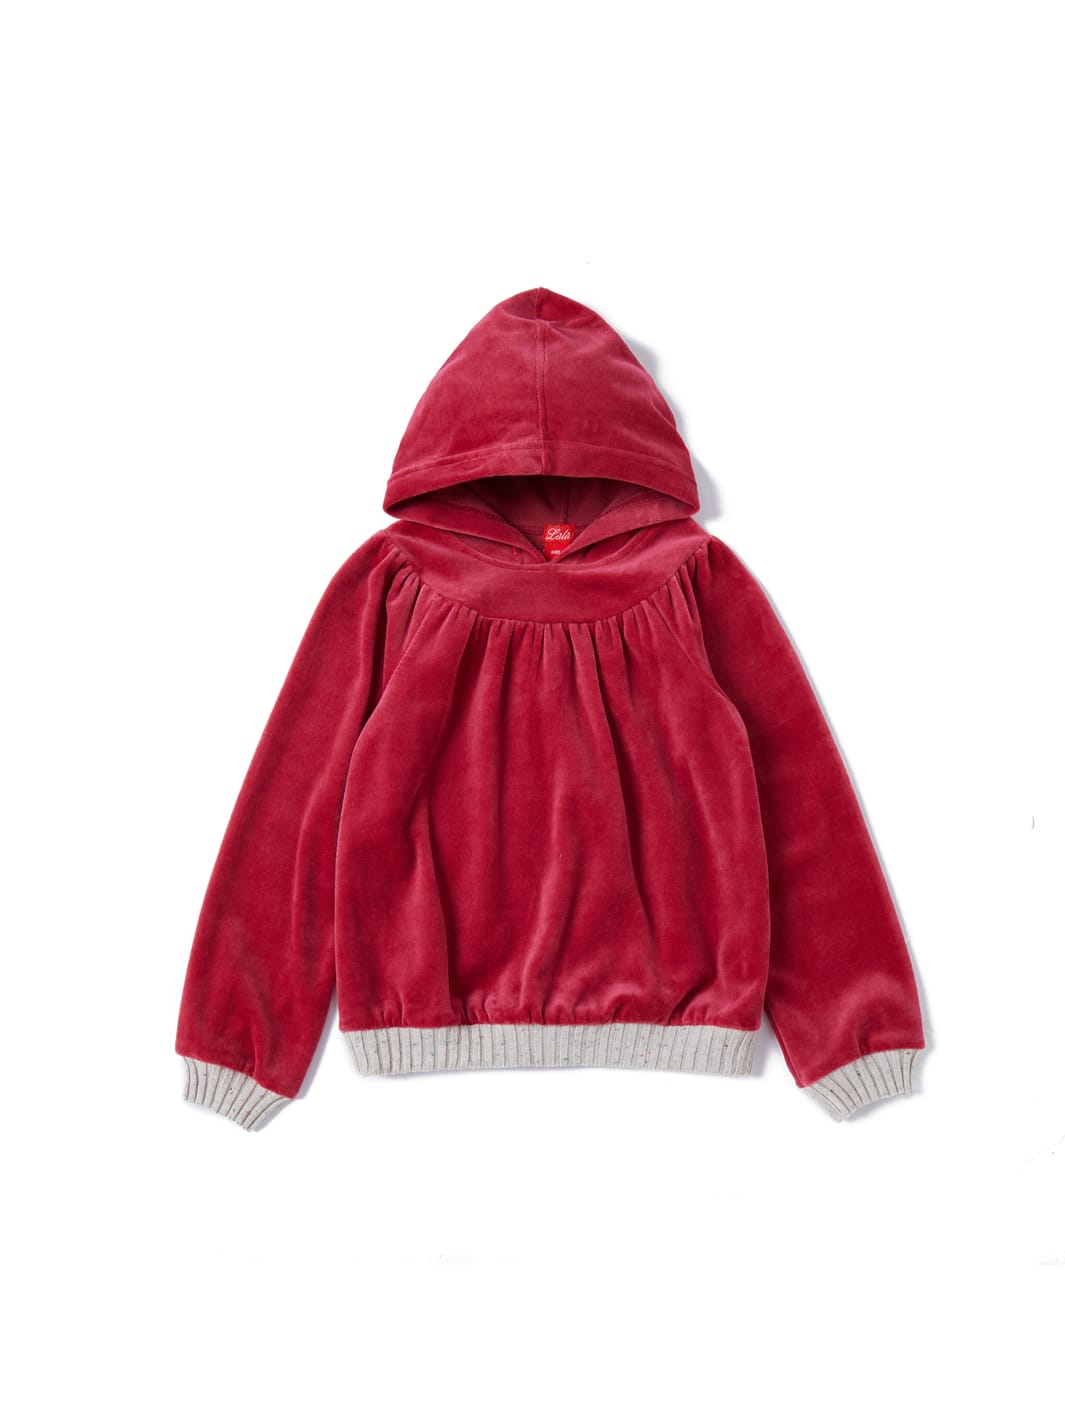 Velour Hooded Gathers Top